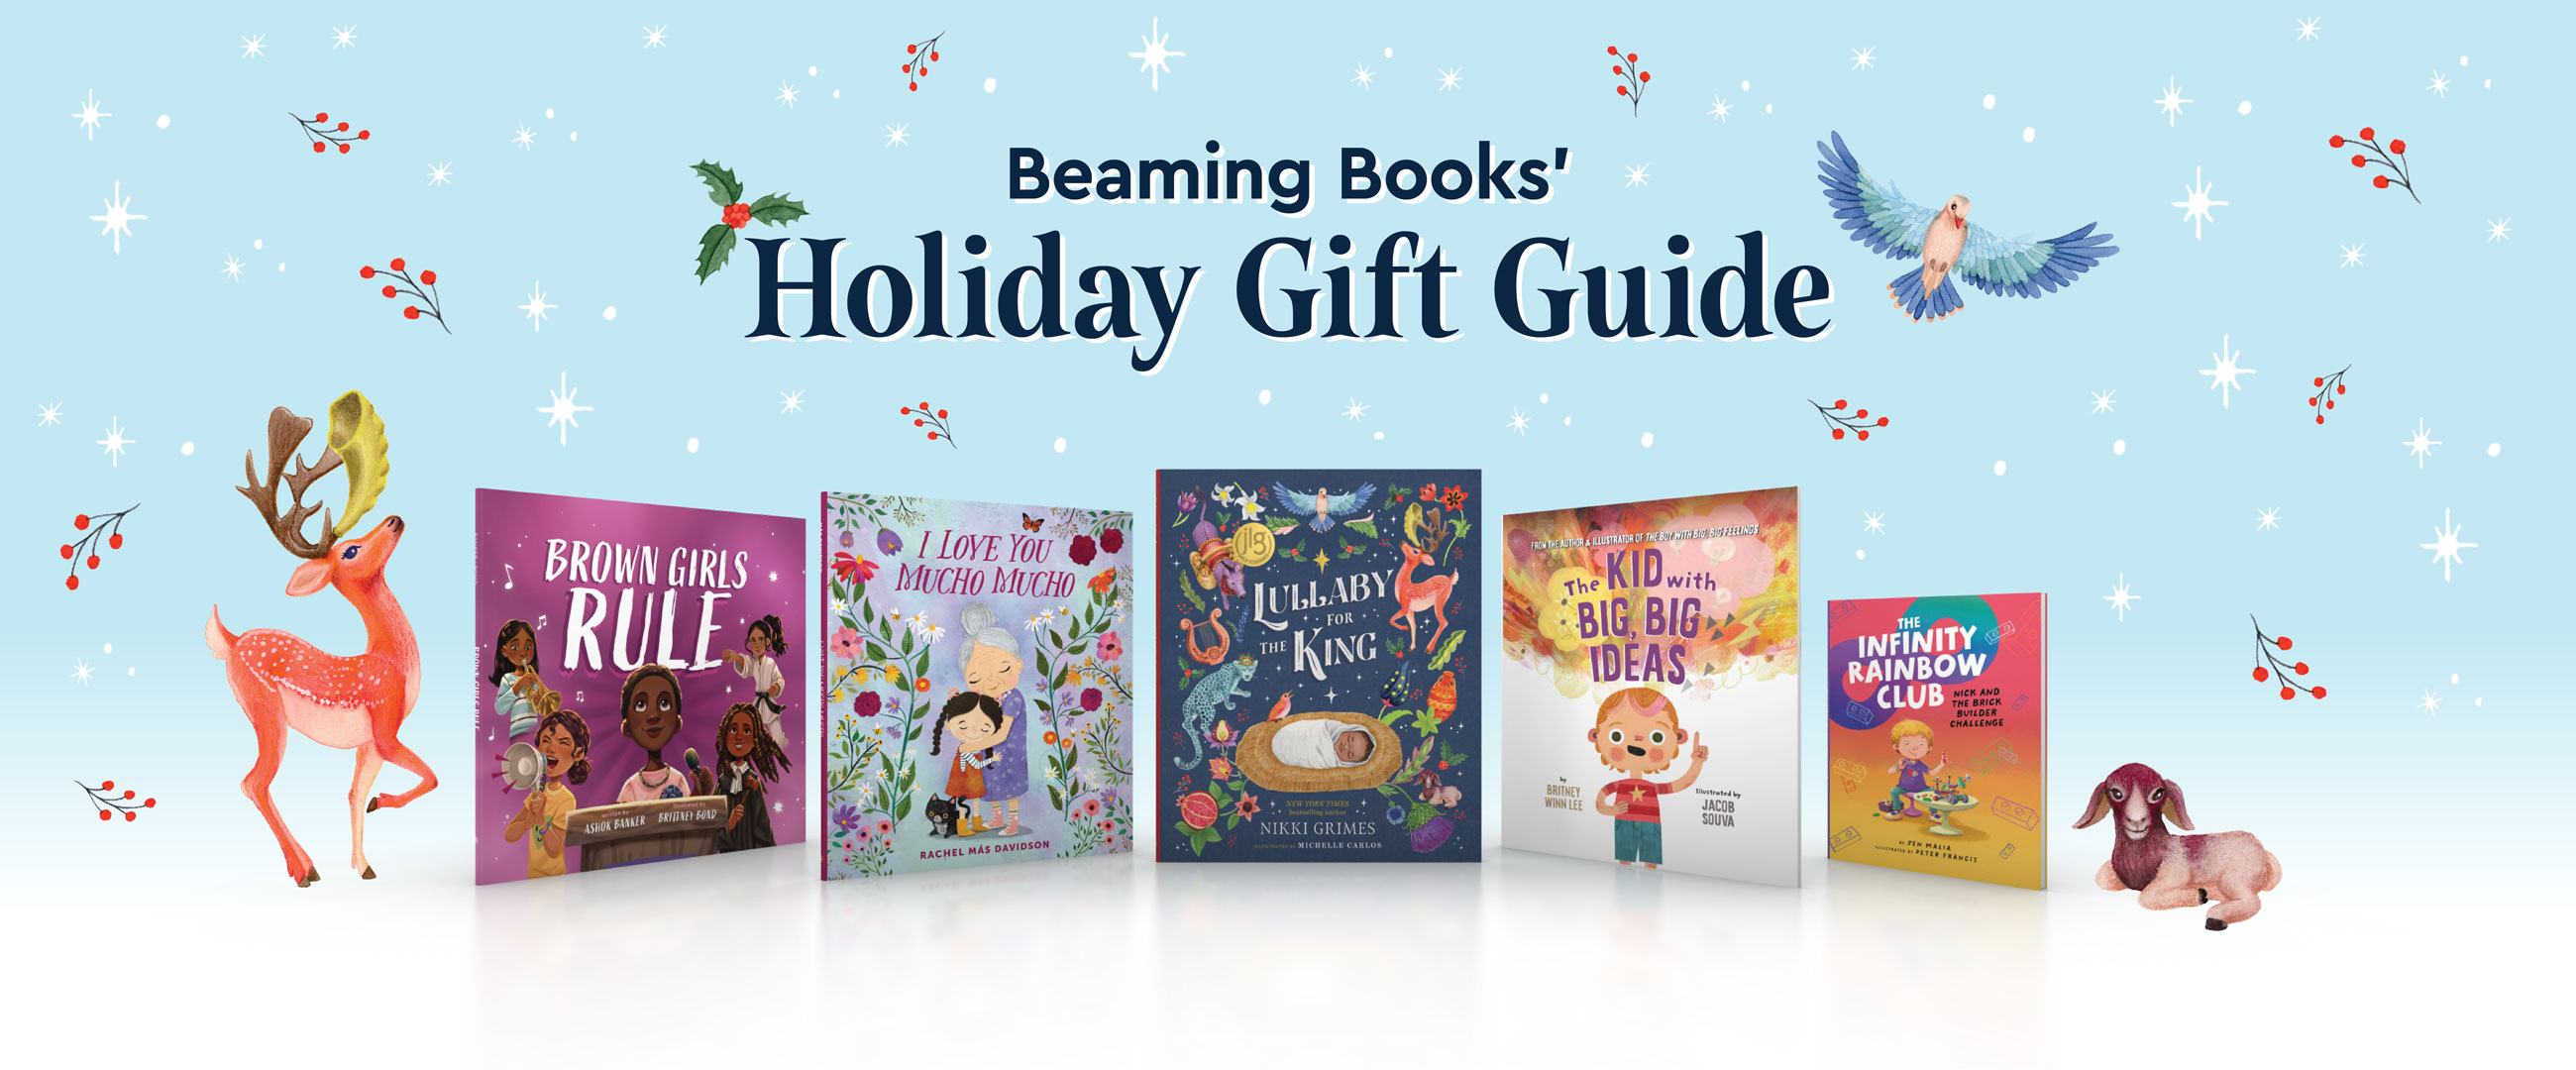 Beaming Books' Holiday Gift Guide